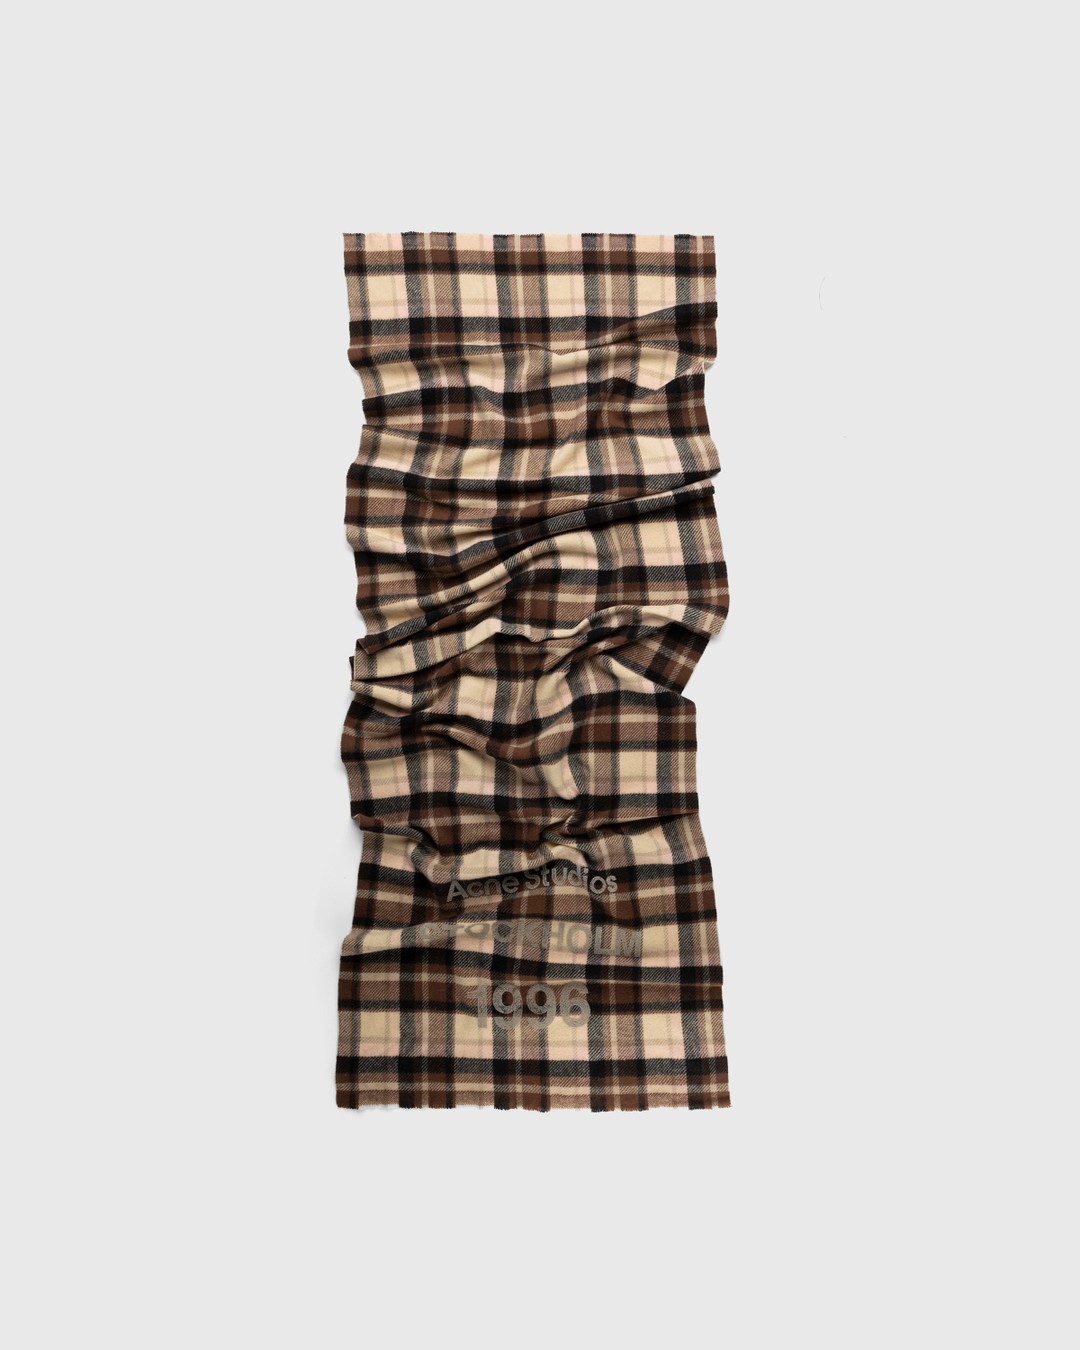 Acne Studios – Checked Logo Print Scarf Brown/Beige - Knits - Multi - Image 1